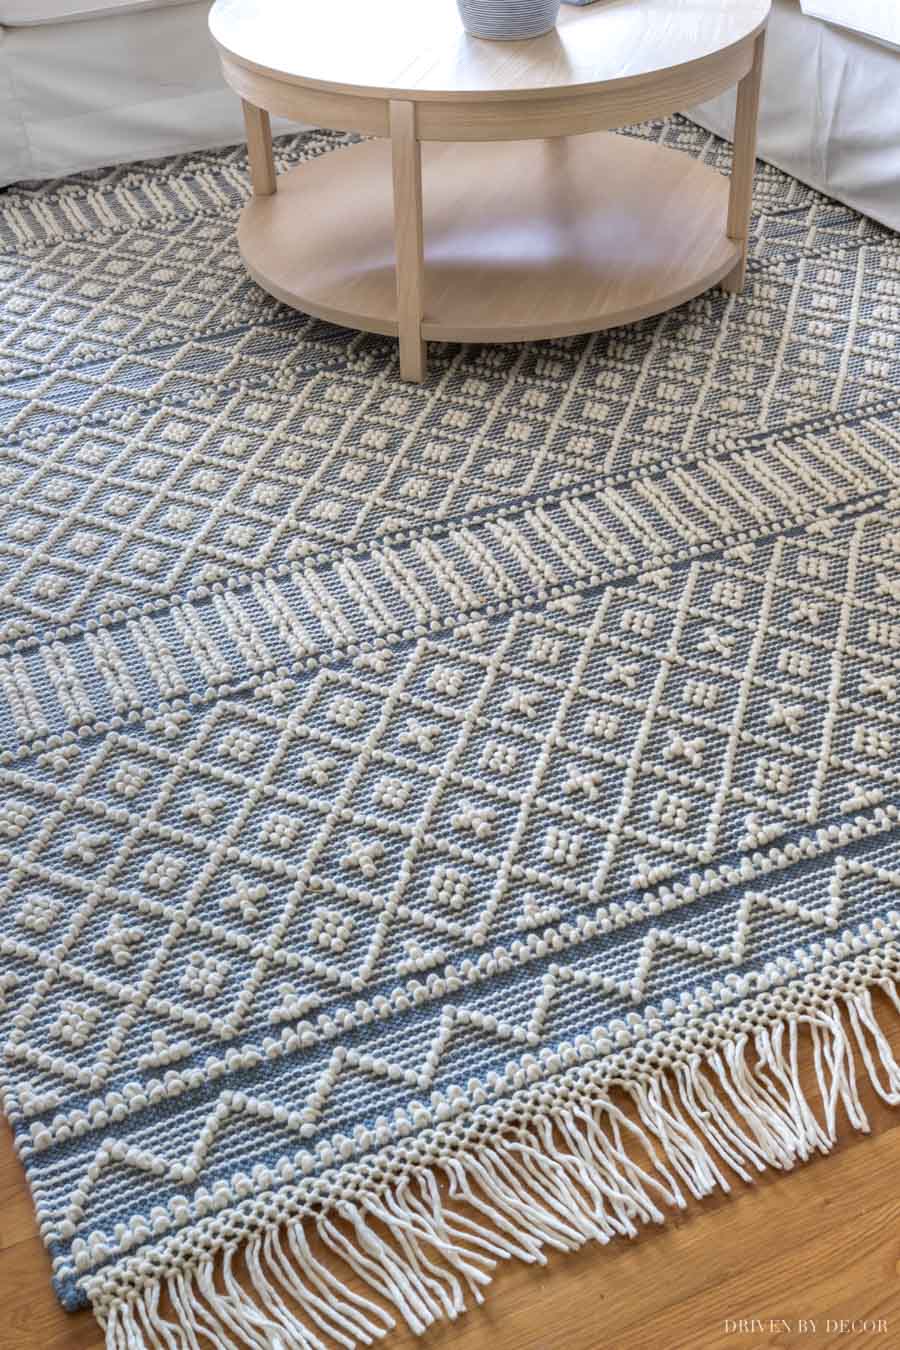 Gorgeous blue and white rug!